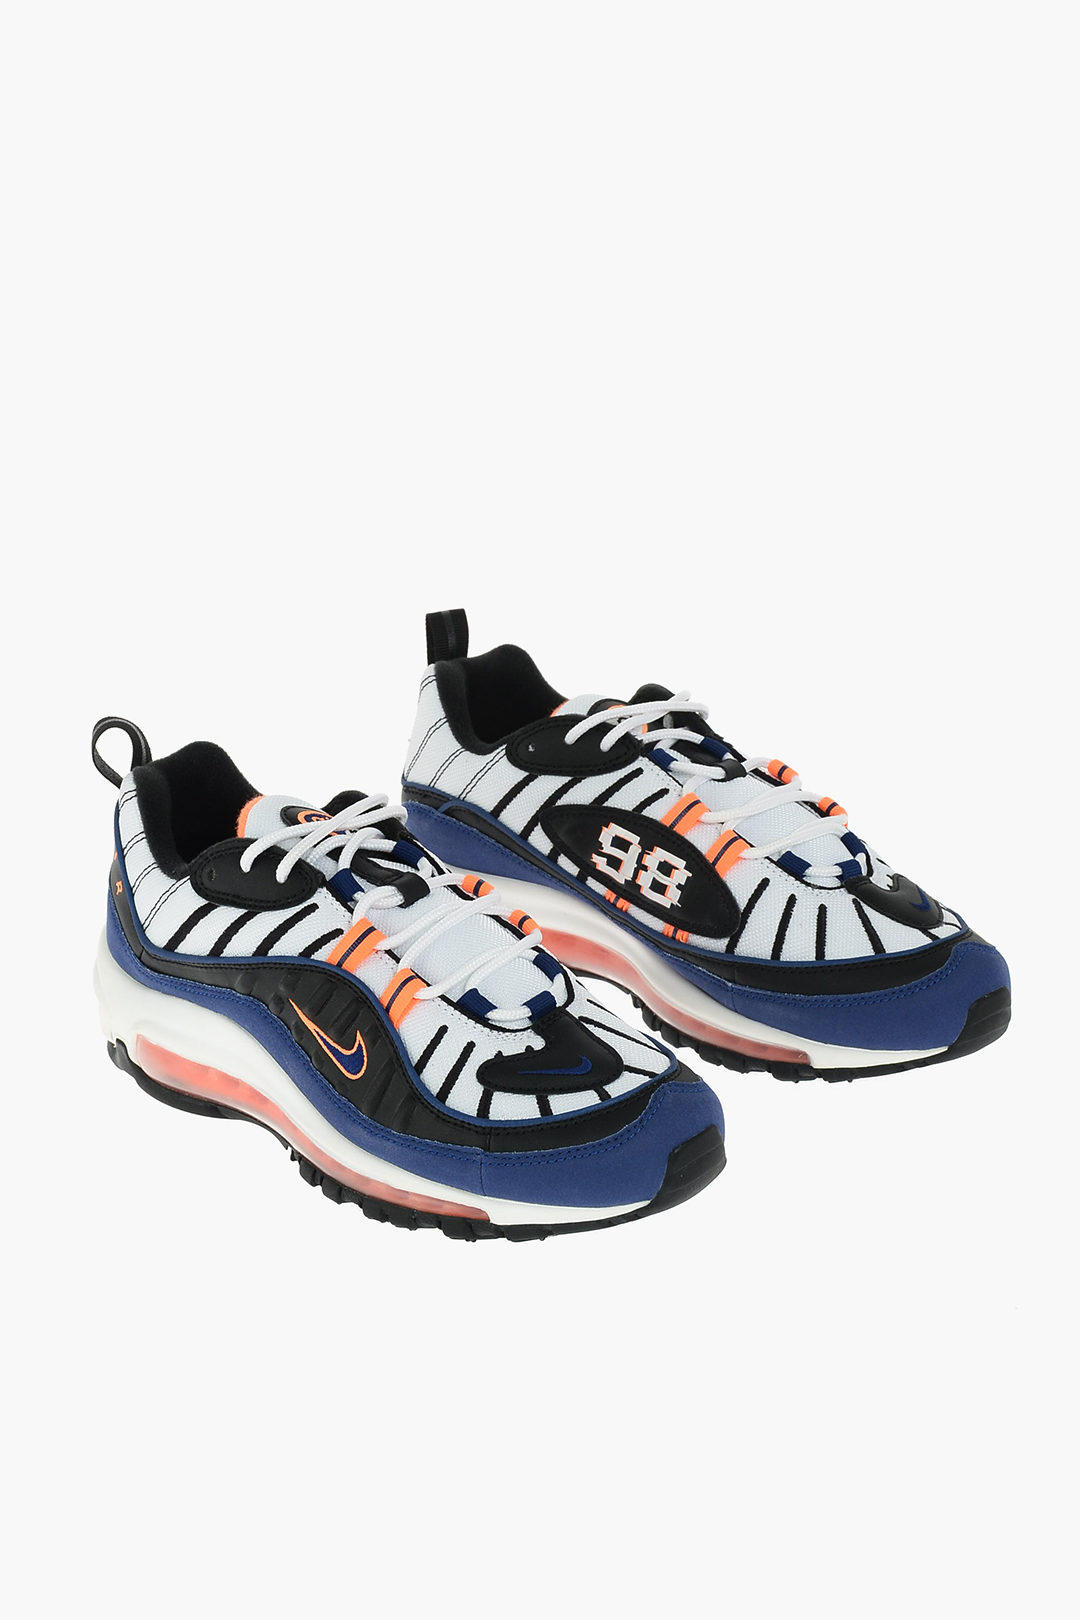 Citar Violar de repuesto Nike fabric AIR MAX 98 sneakers with faux leather details unisex men women  - Glamood Outlet